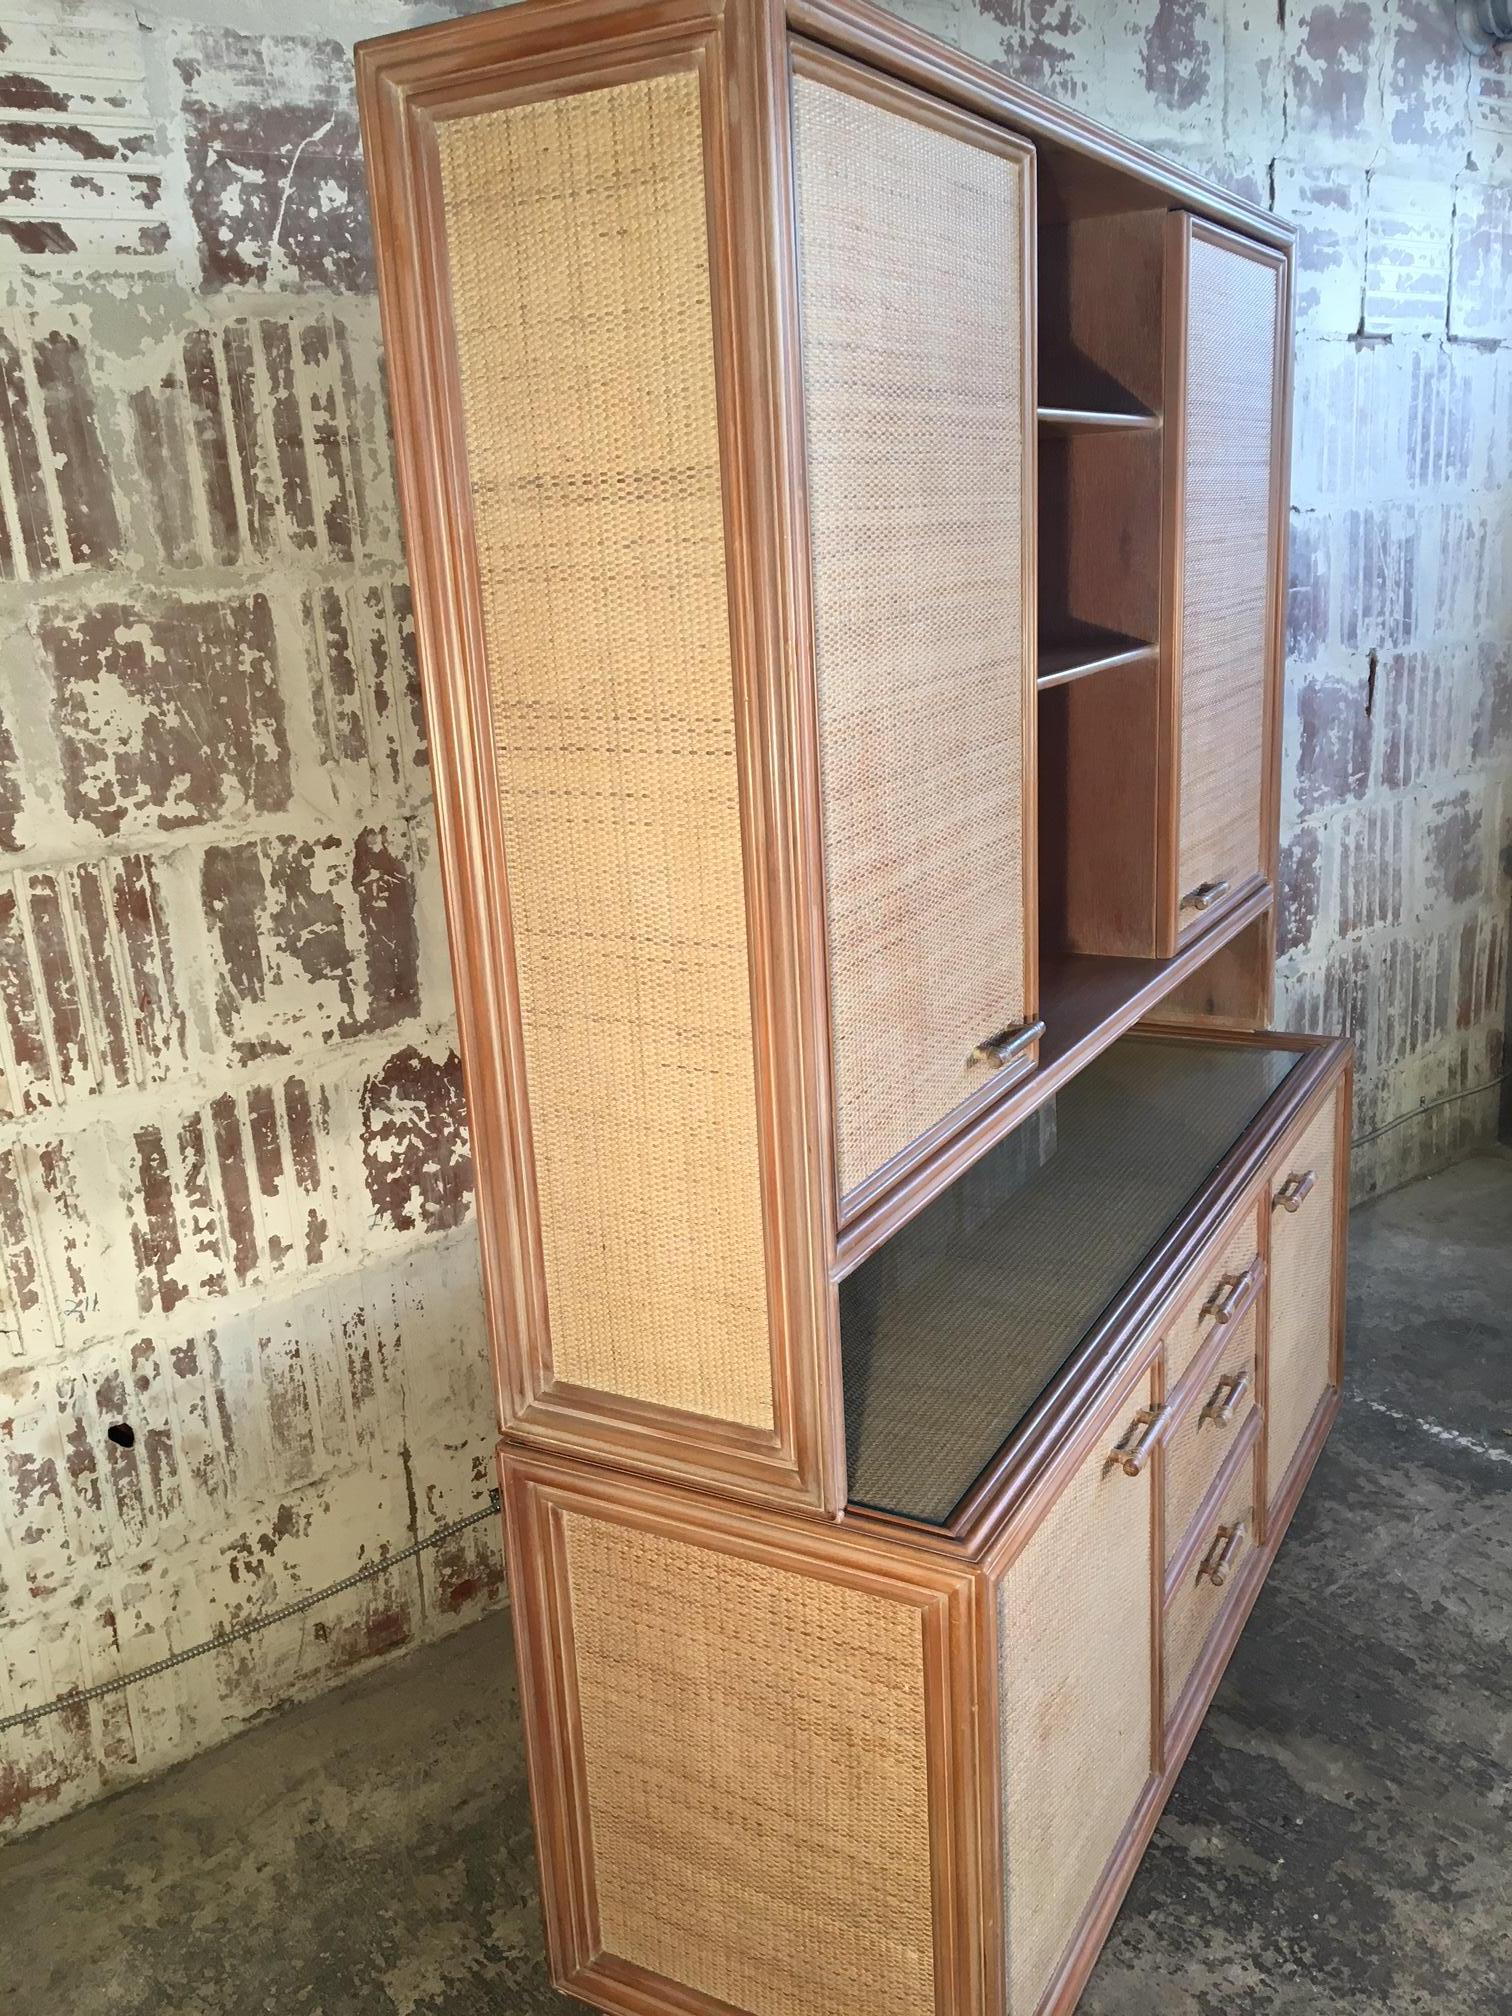 Rattan and Faux Bamboo China Buffet Cabinet with Hutch (Ende des 20. Jahrhunderts)